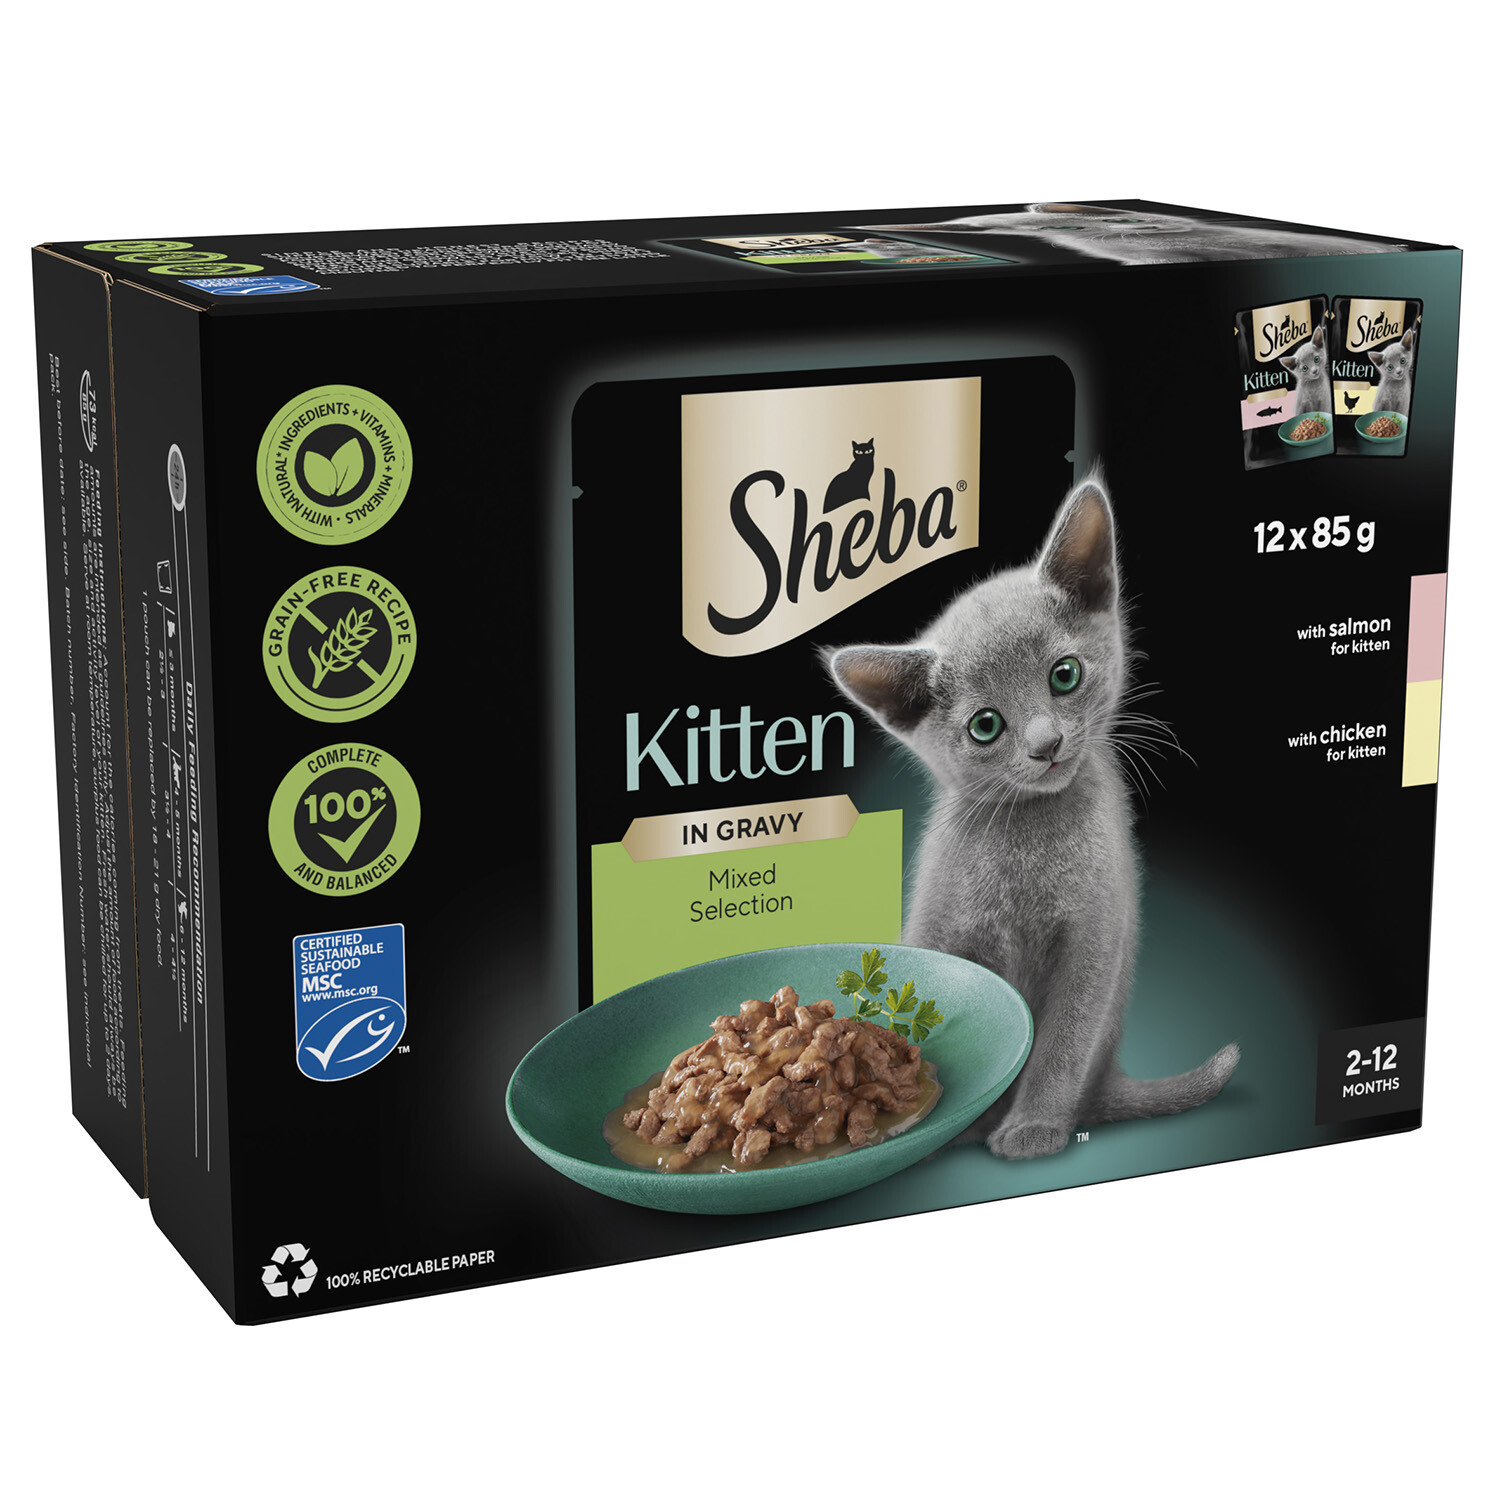 Sheba Mixed Selection Kitten Food Pouches in Gravy - 12 Image 2